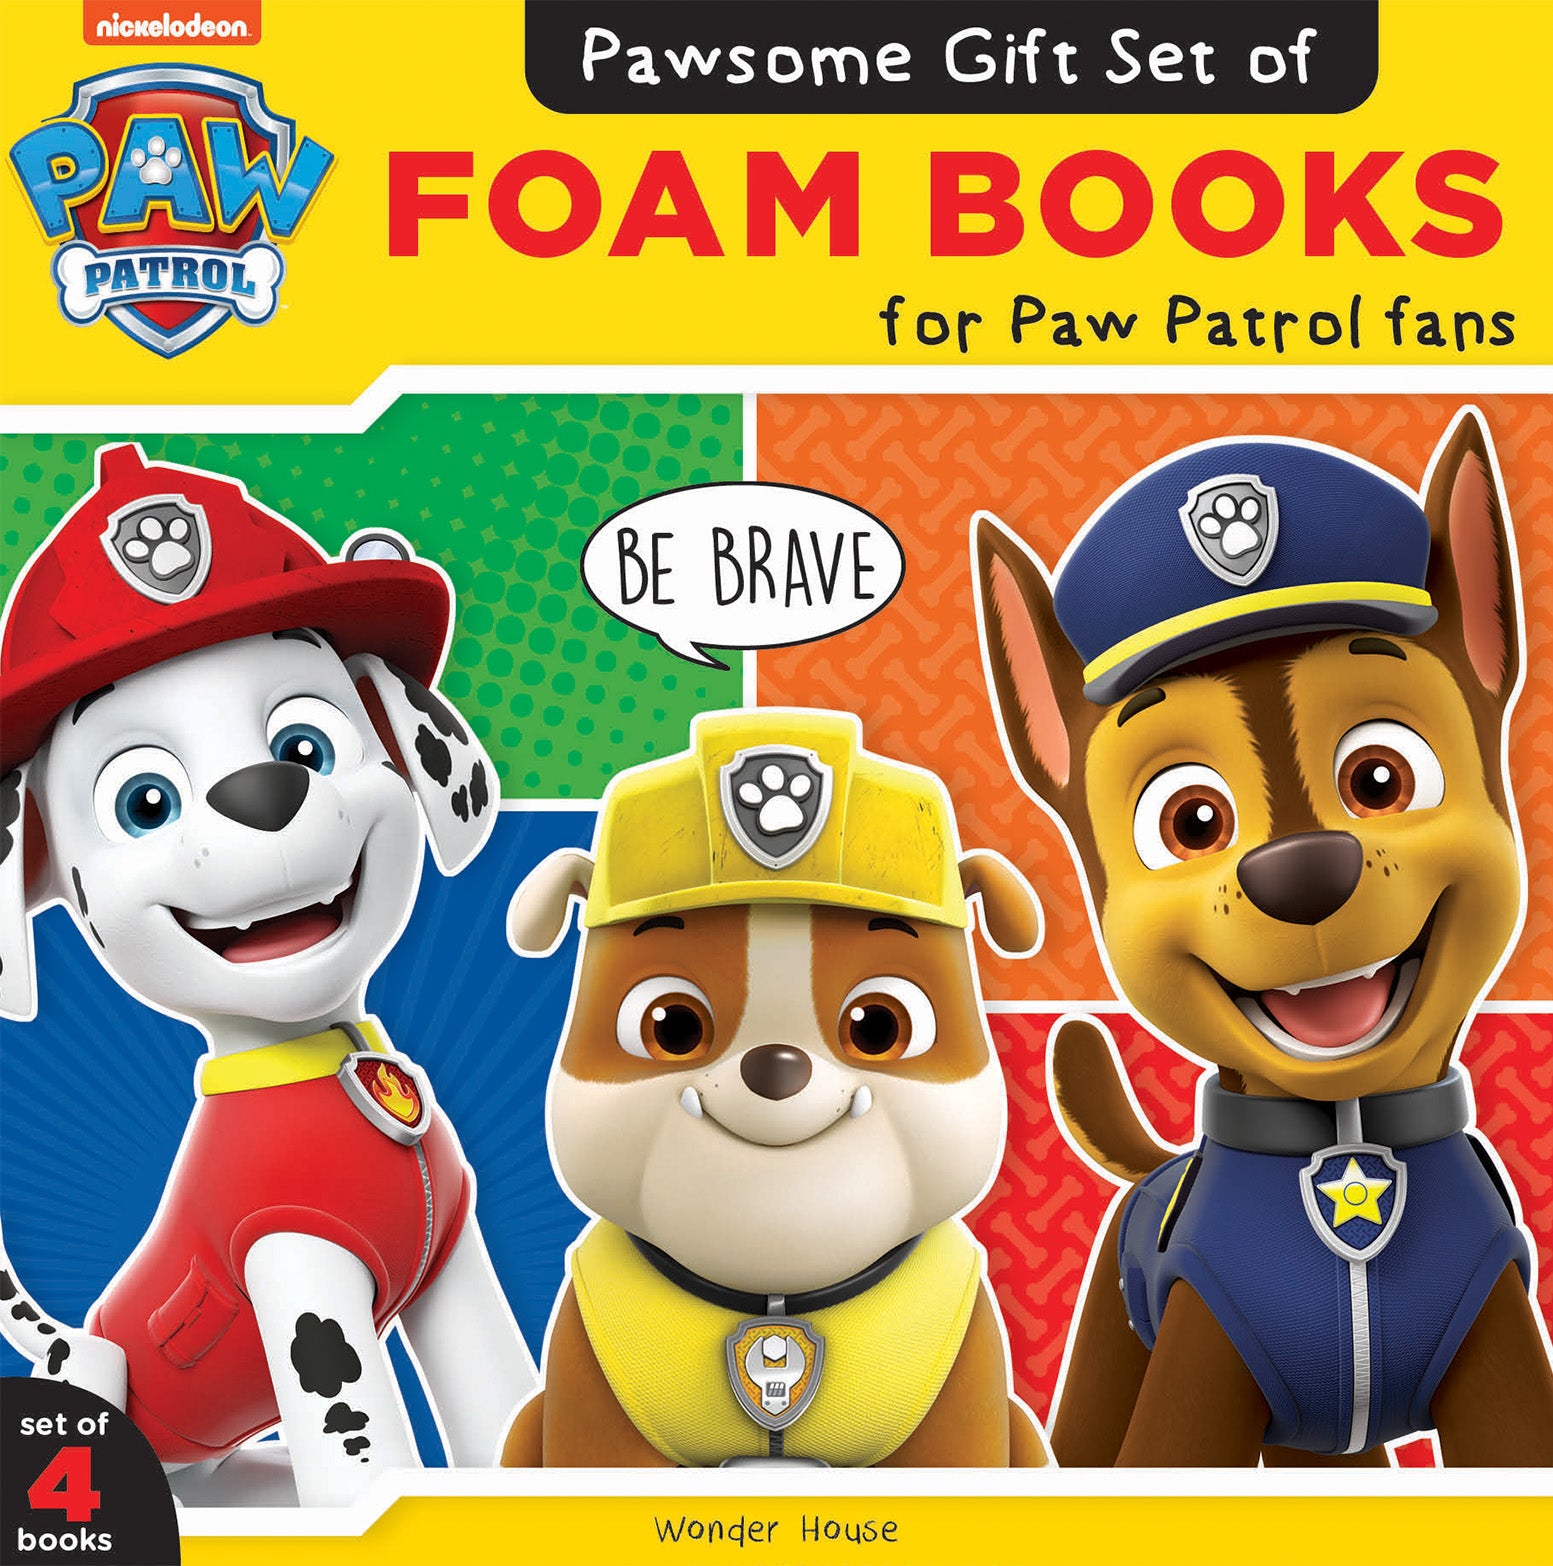 Pawsome Gift Set of Foam Books For Paw Patrol Fans